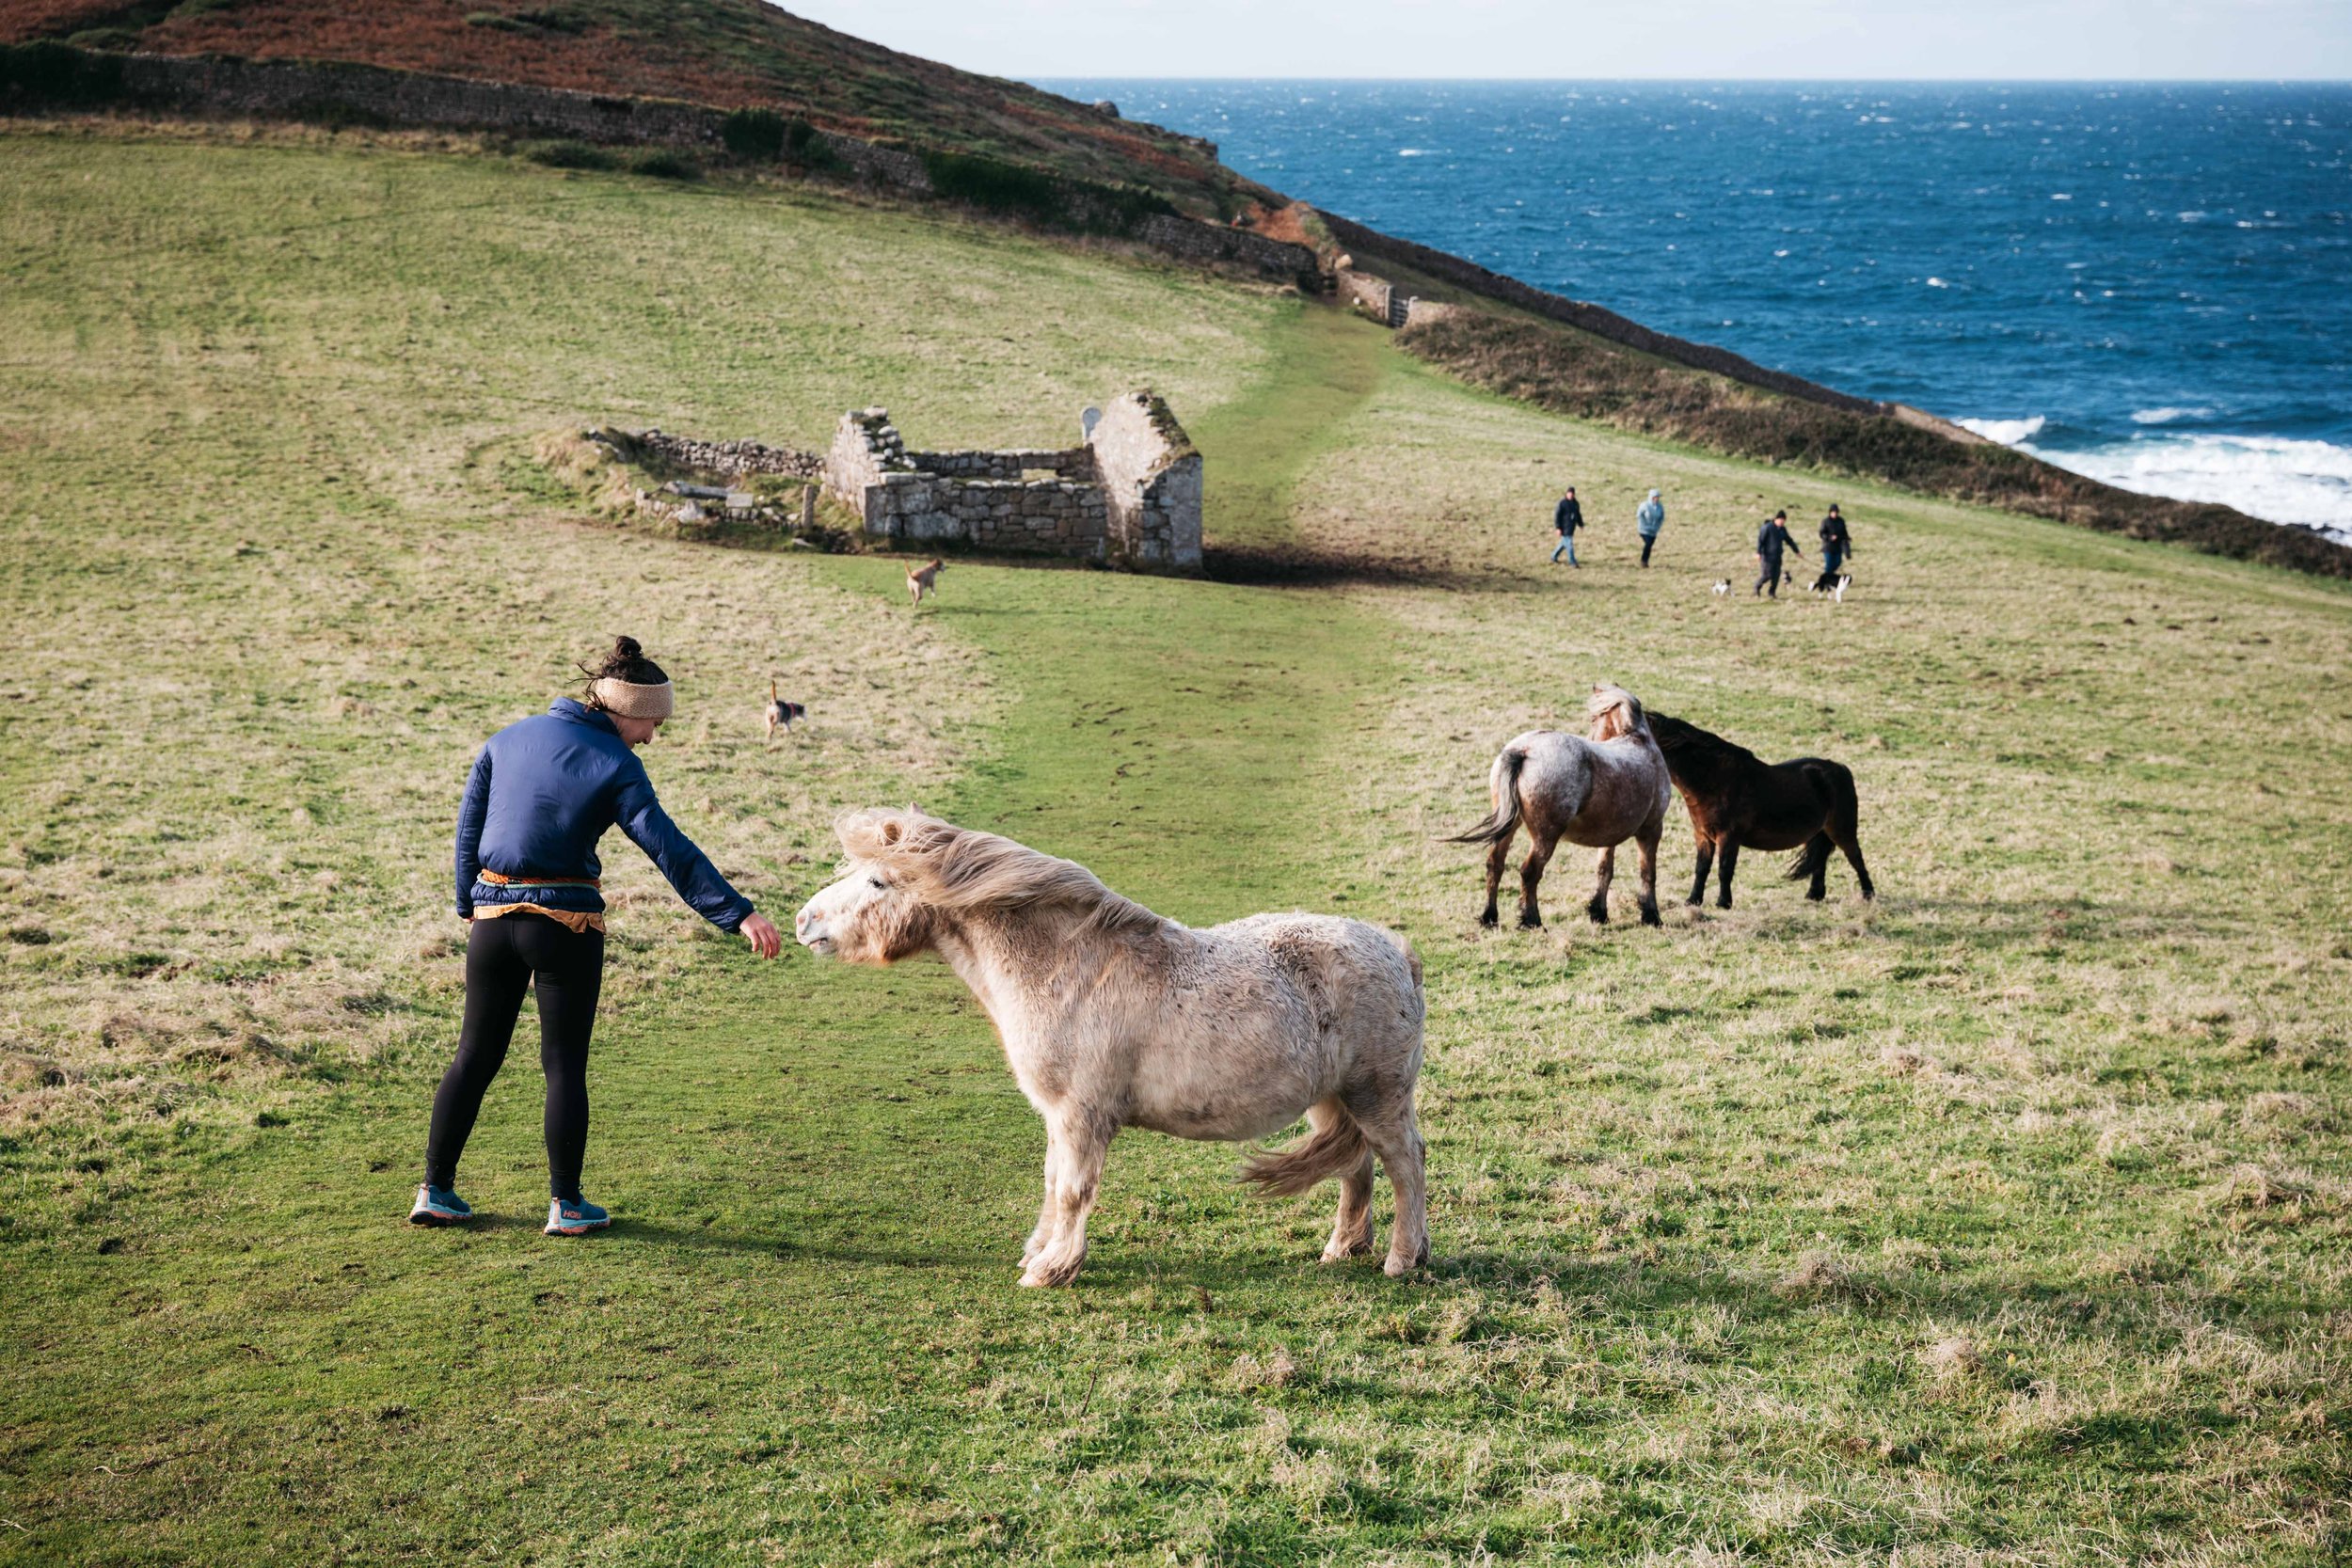  To reach the furthermost mine, you need to walk through a field of ponies 